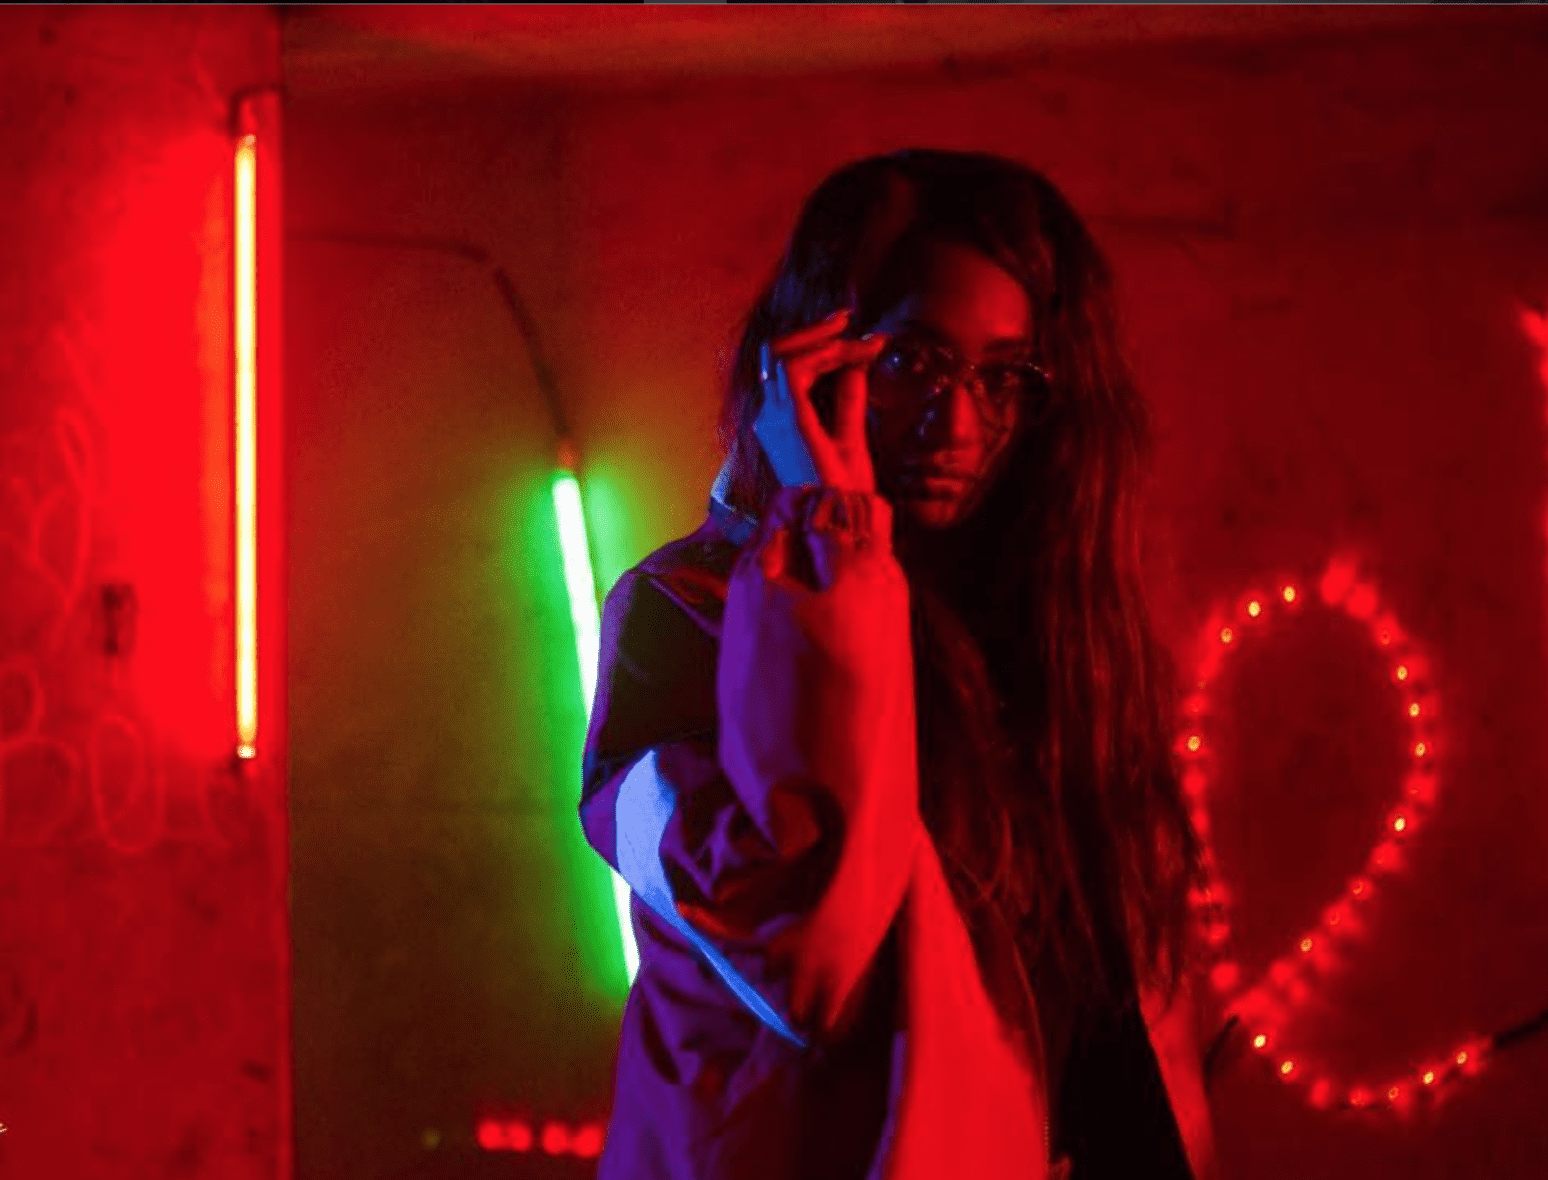 Bella Alubo is cool as funk on new music video for “Radio” ft Ycee